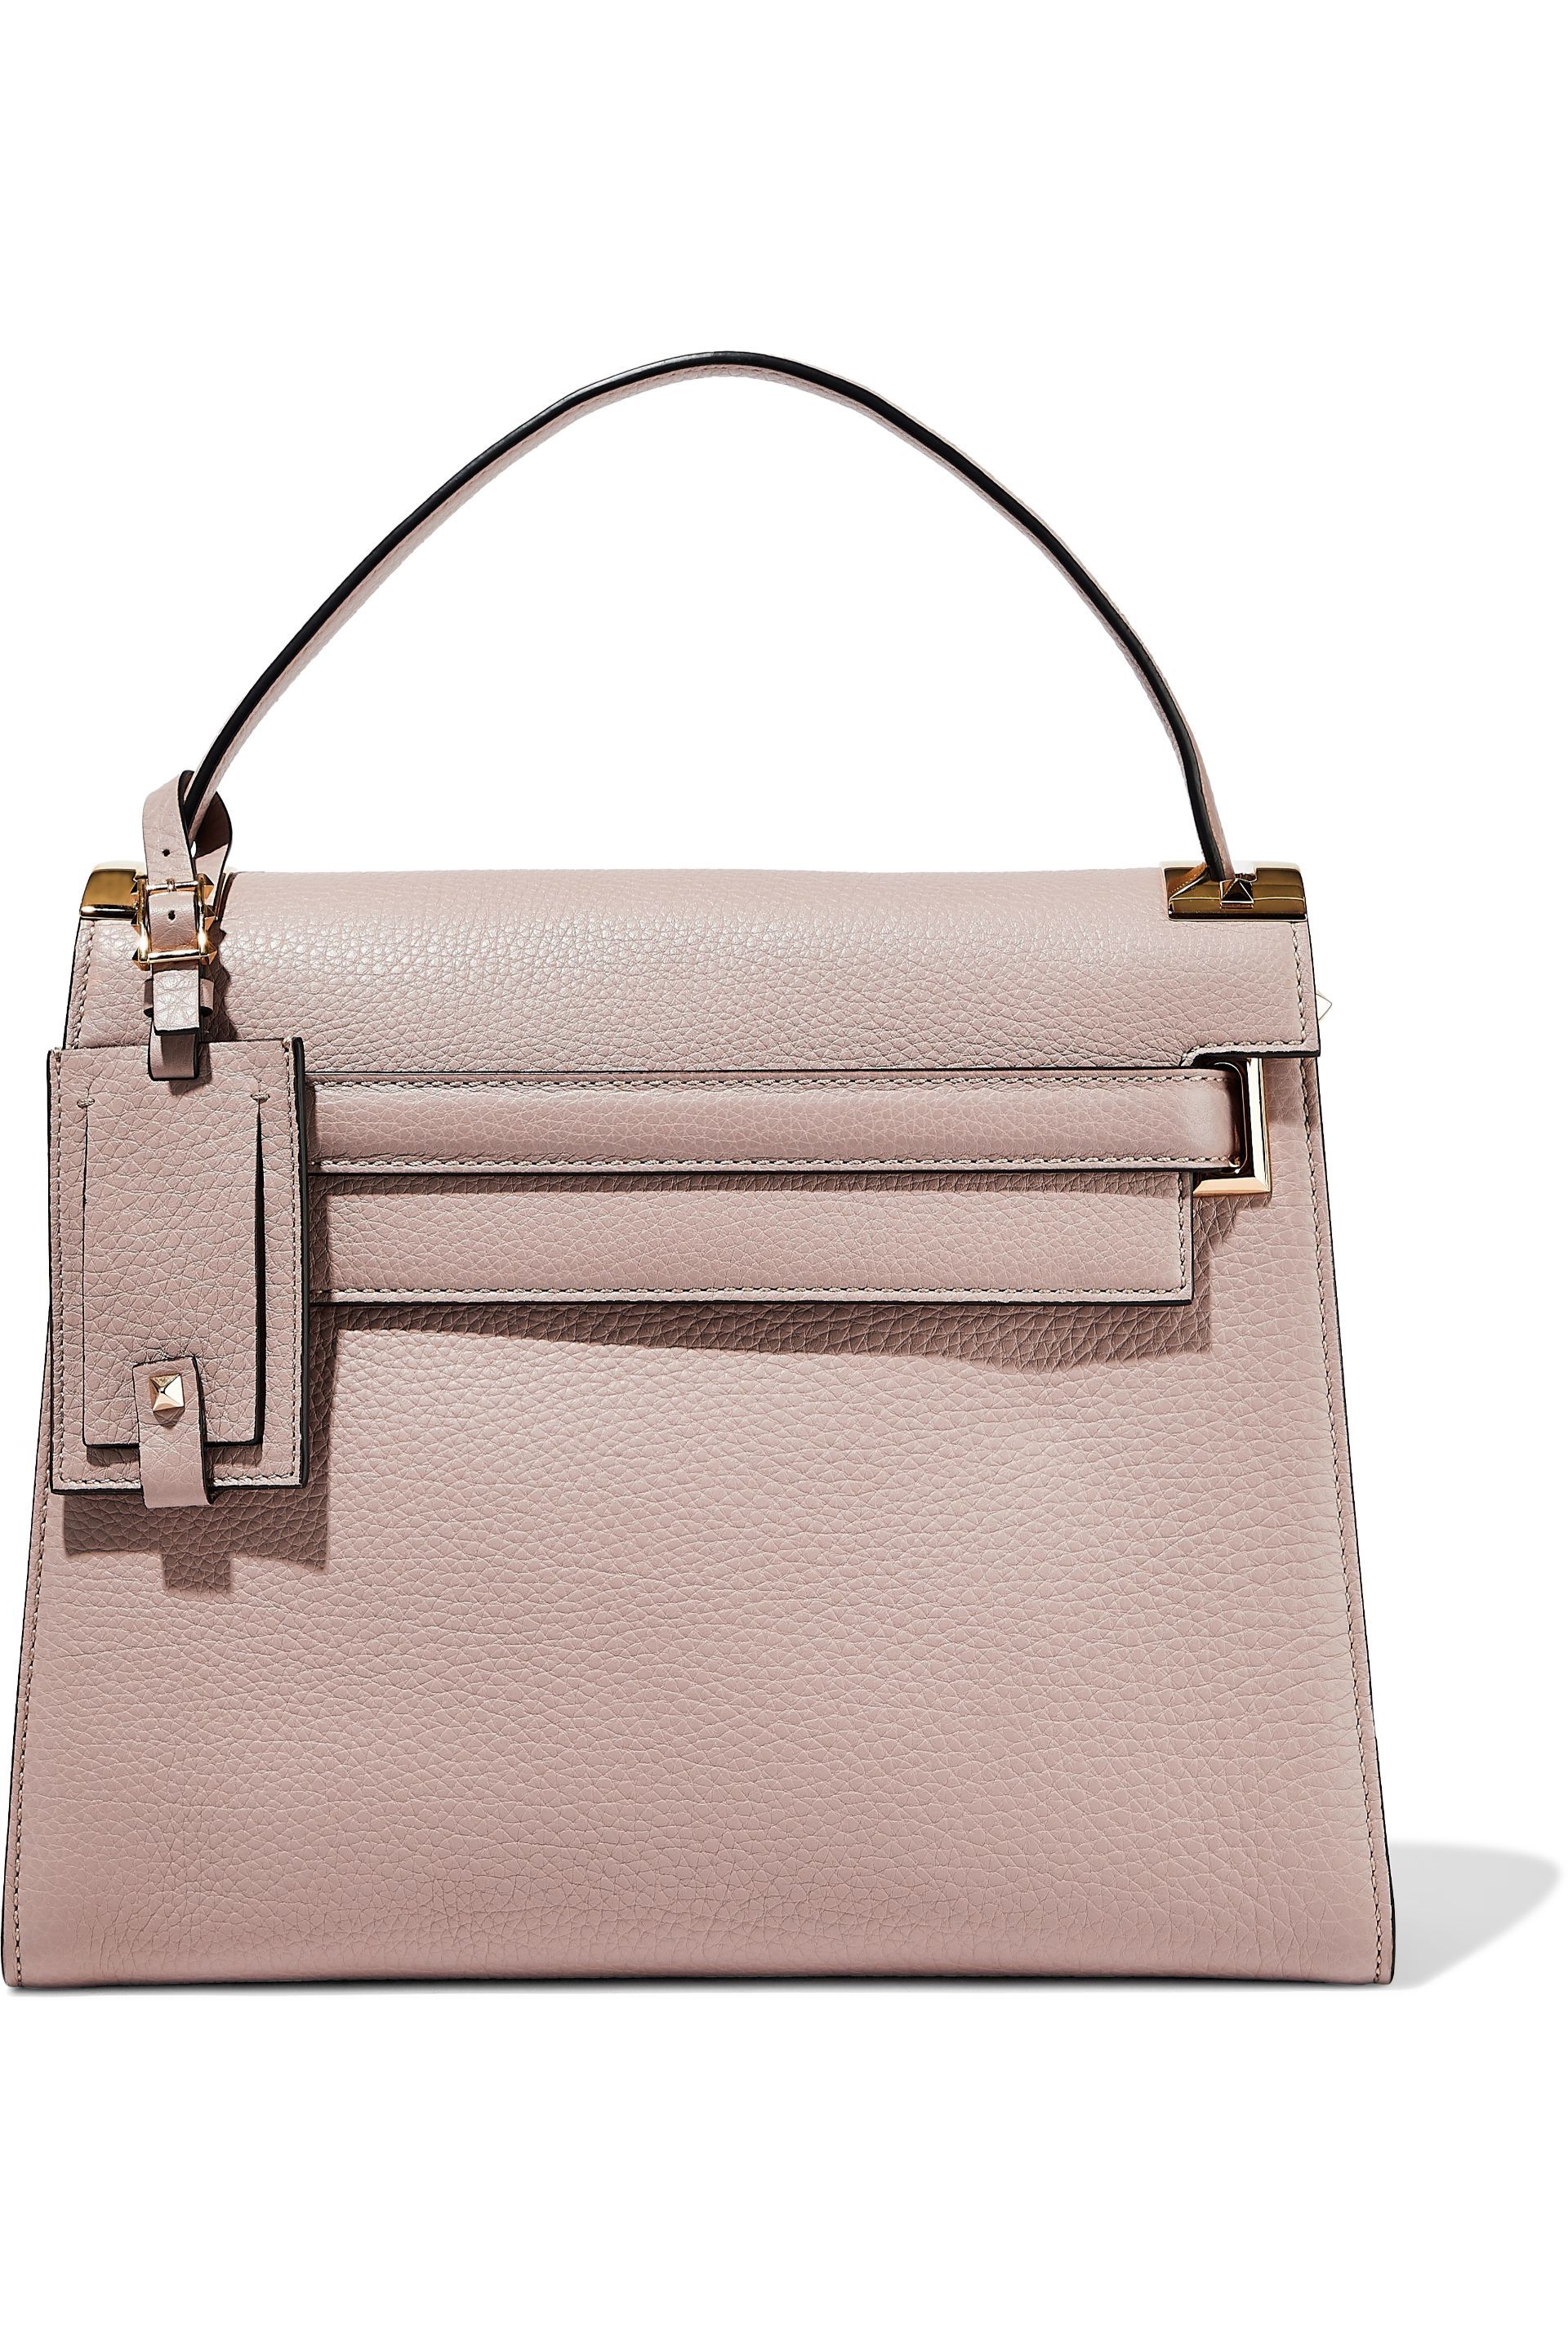 Discount Designer Handbags | Sale Up To 70% Off | THE OUTNET